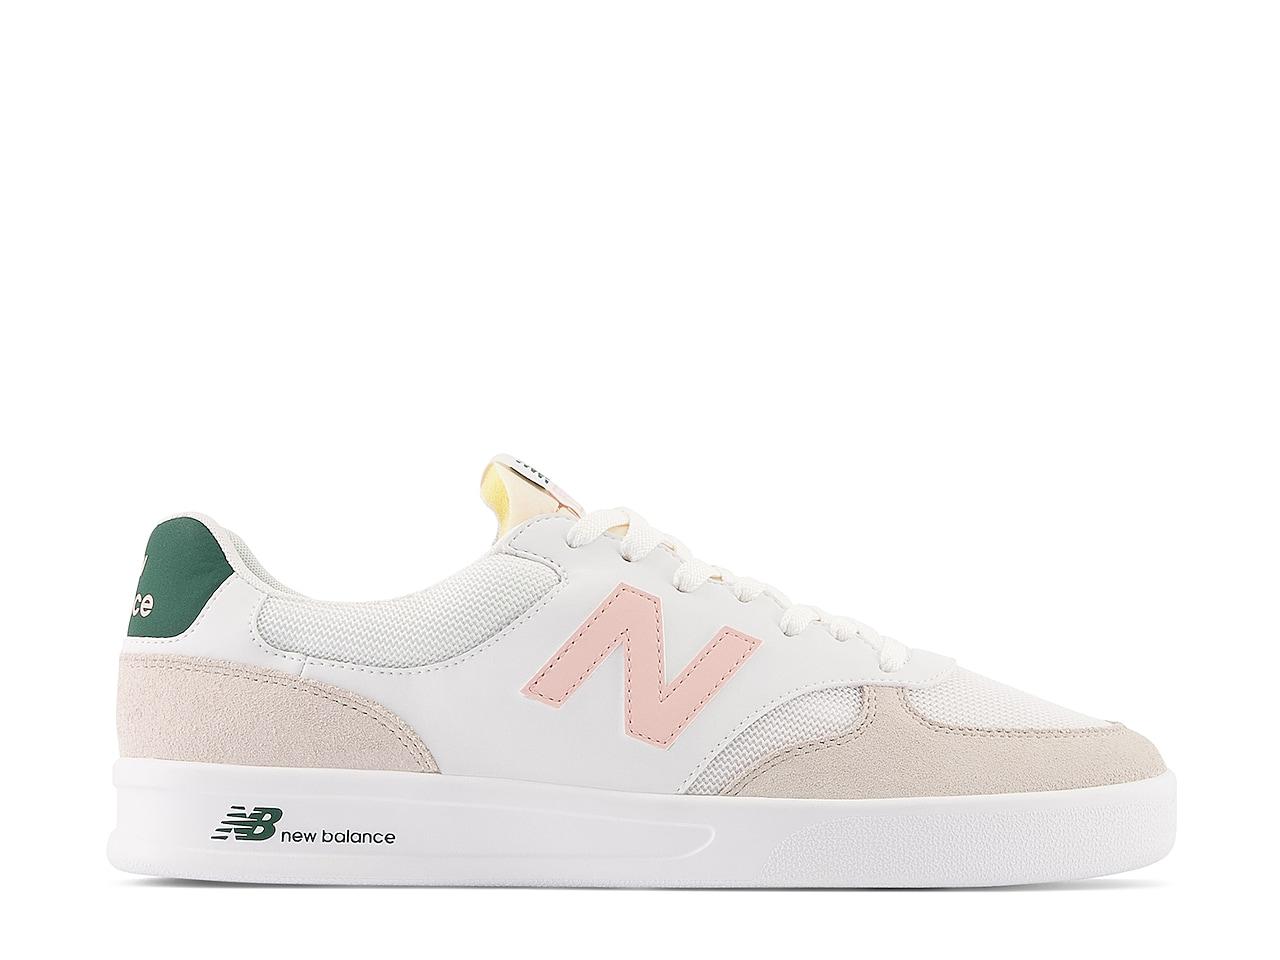 New Balance Synthetic 300 V3 Sneaker in White/Pink (White) | Lyst